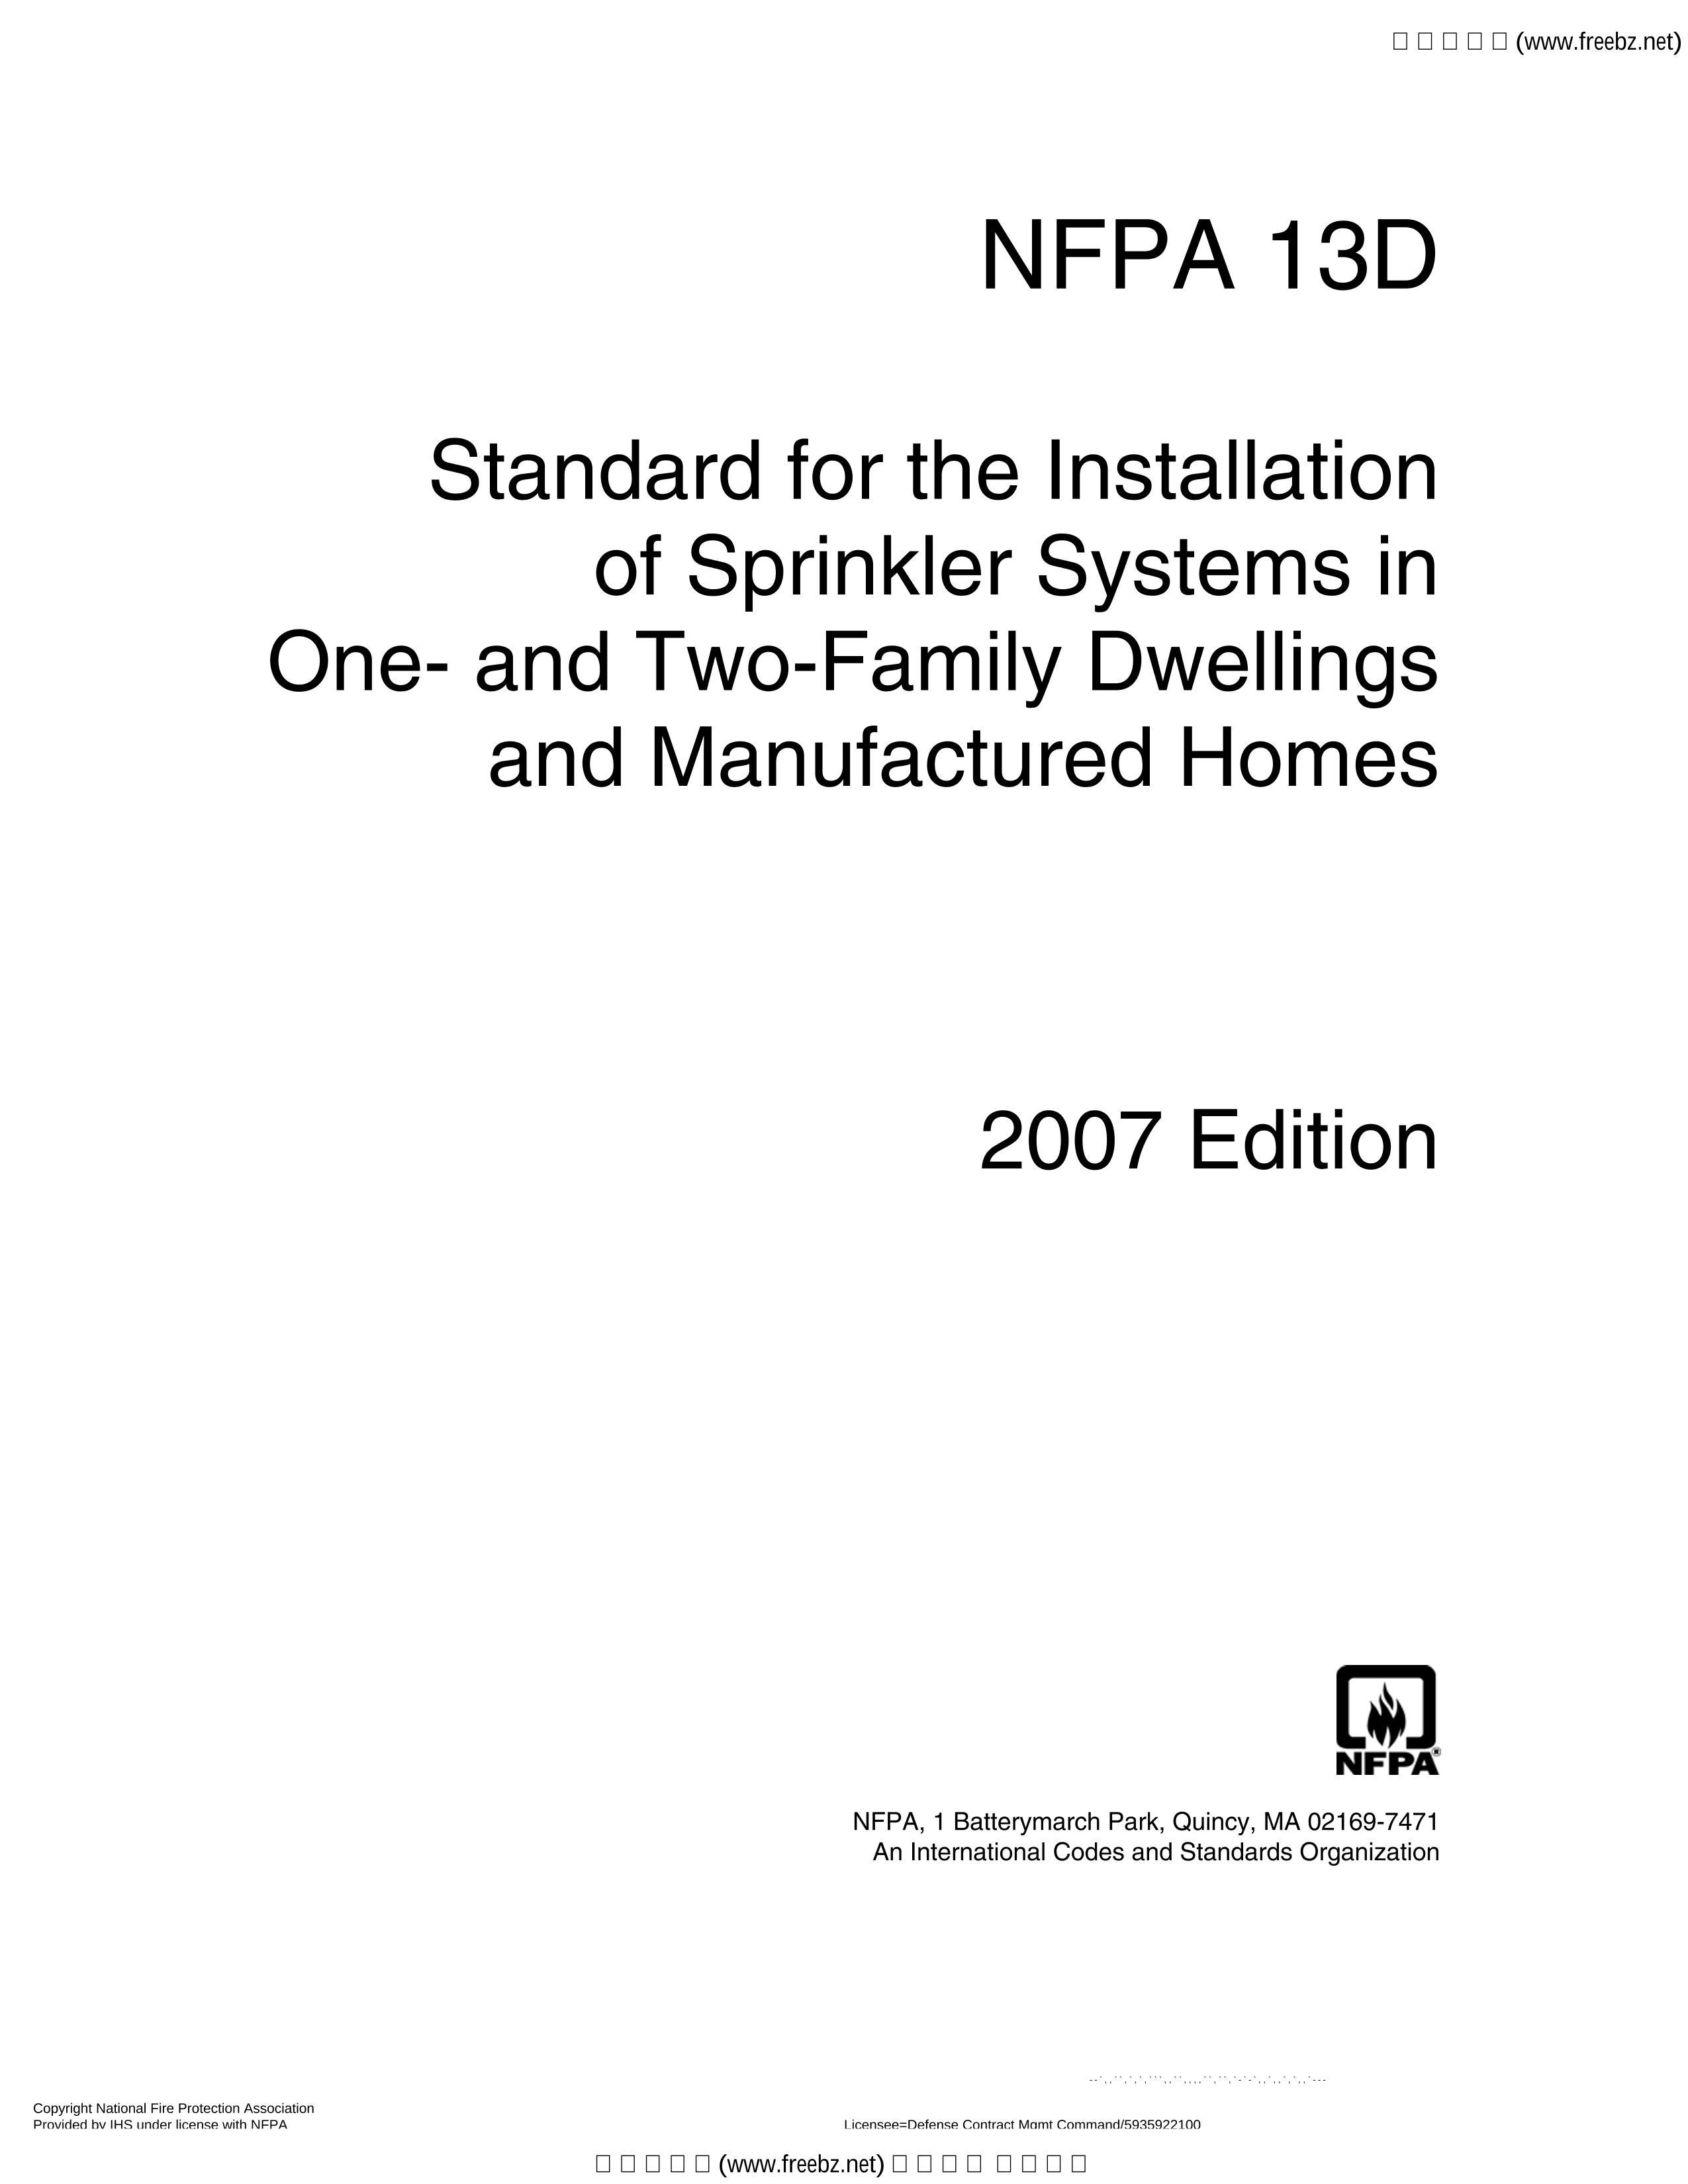 NFPA 13D-2007 Standard for the Installation of Sprinkler Systems in One- and Two-Family Dwellings and Manufactured Homes.pdf1ҳ